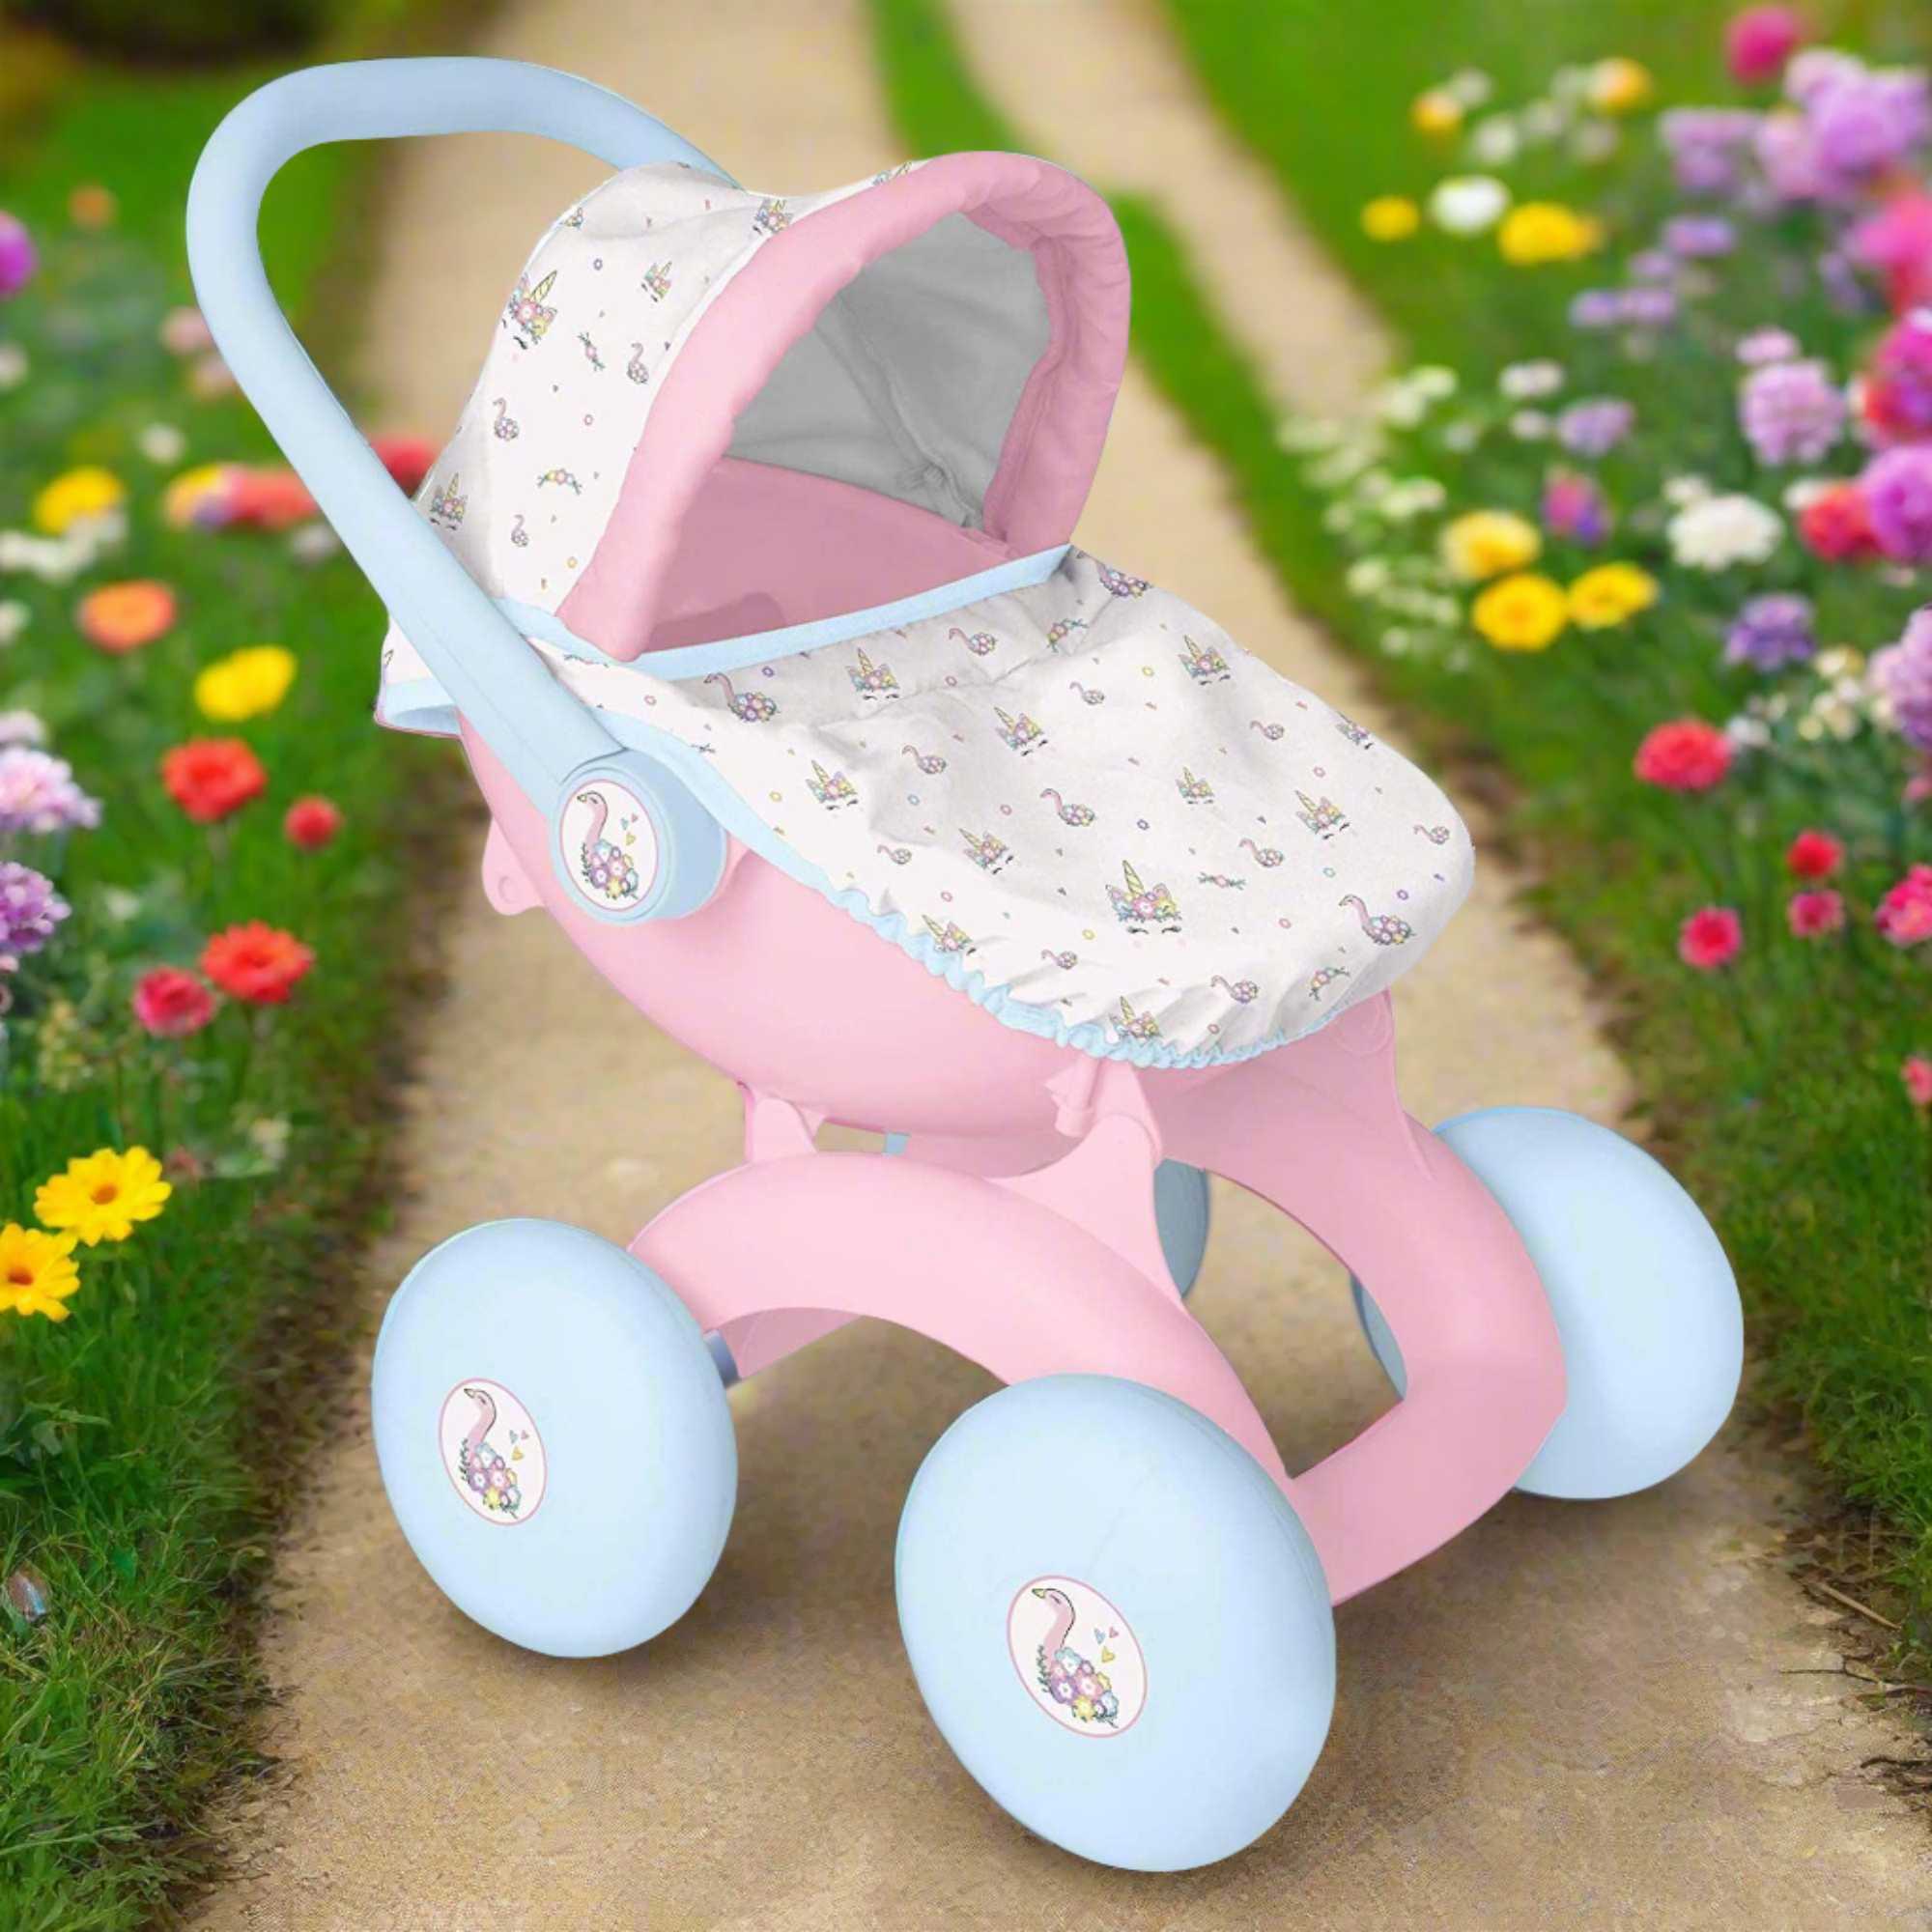 BabyBoo My First 4-IN-1 Interchangeable Dolls Pram - Versatile doll pram with multiple configurations for imaginative play